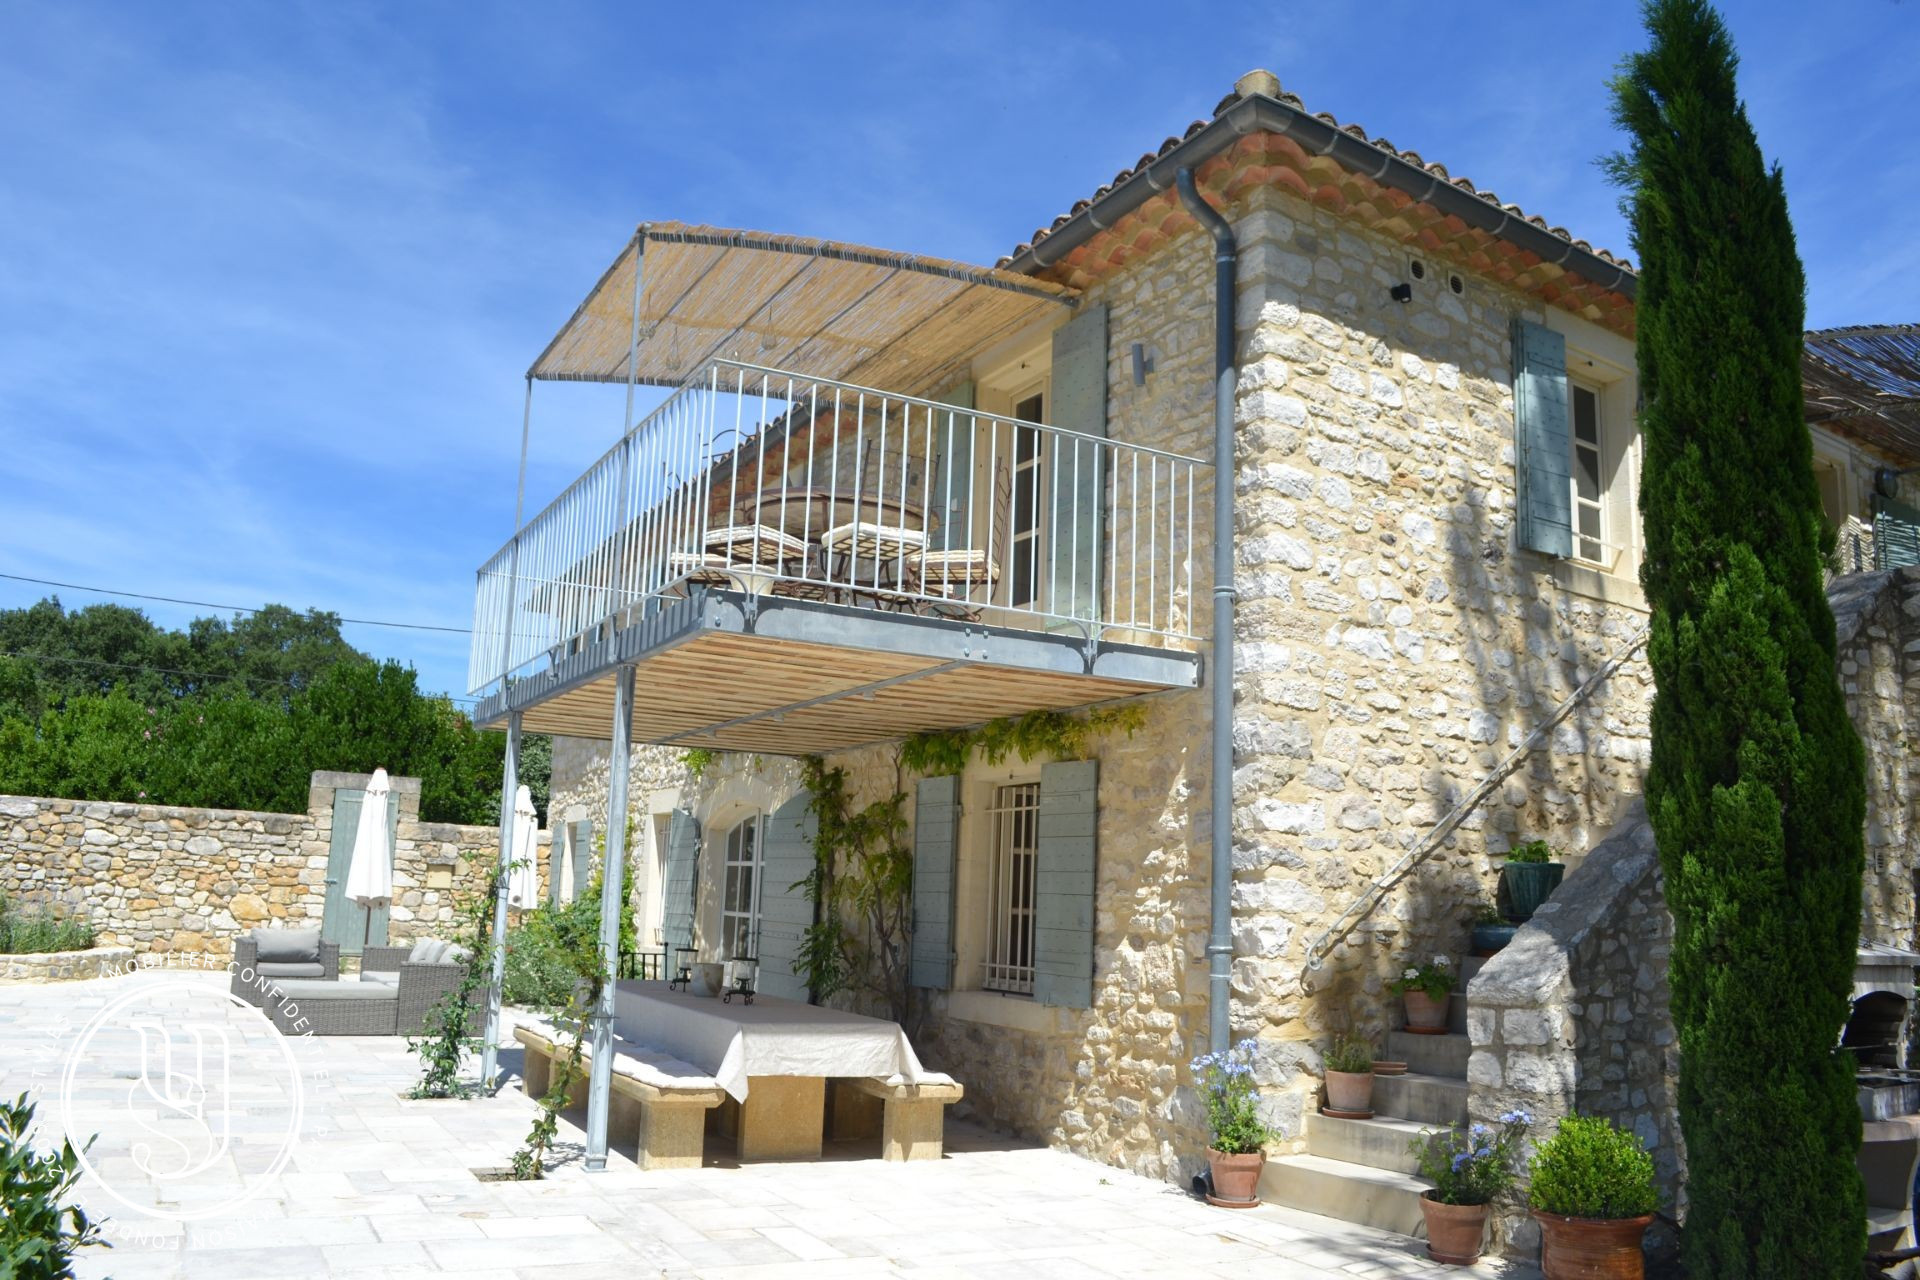 Uzès - nearby, under offer, in the countryside, under offer - image 2